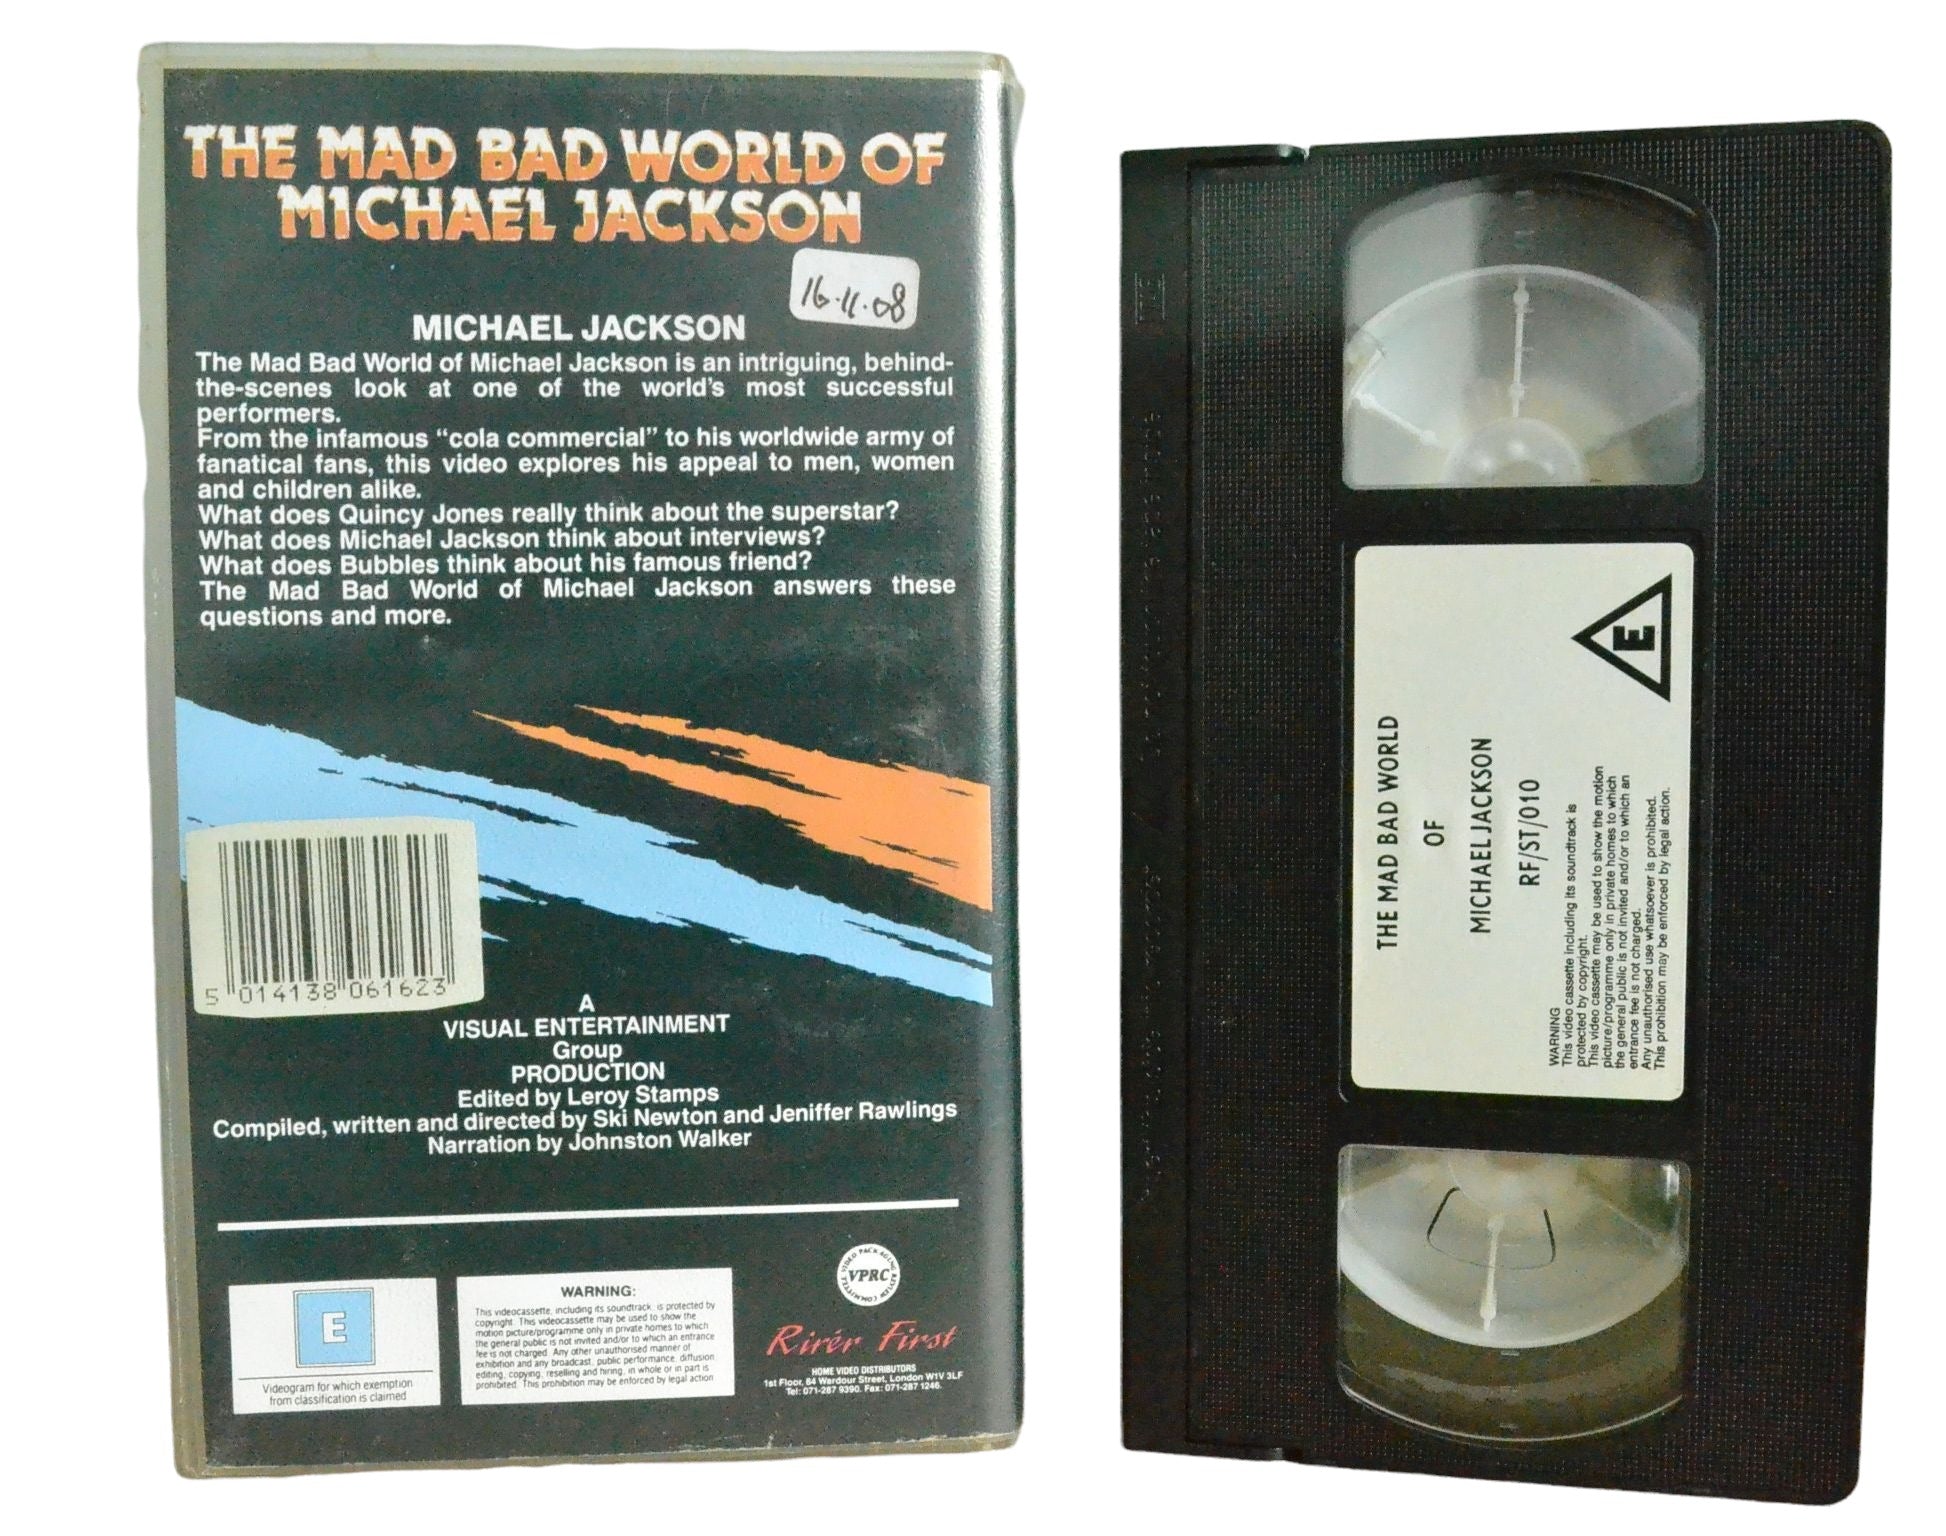 The Mad Bad World Of Michael Jackson - Michael Jackson - River First Video - Music - Pal VHS-